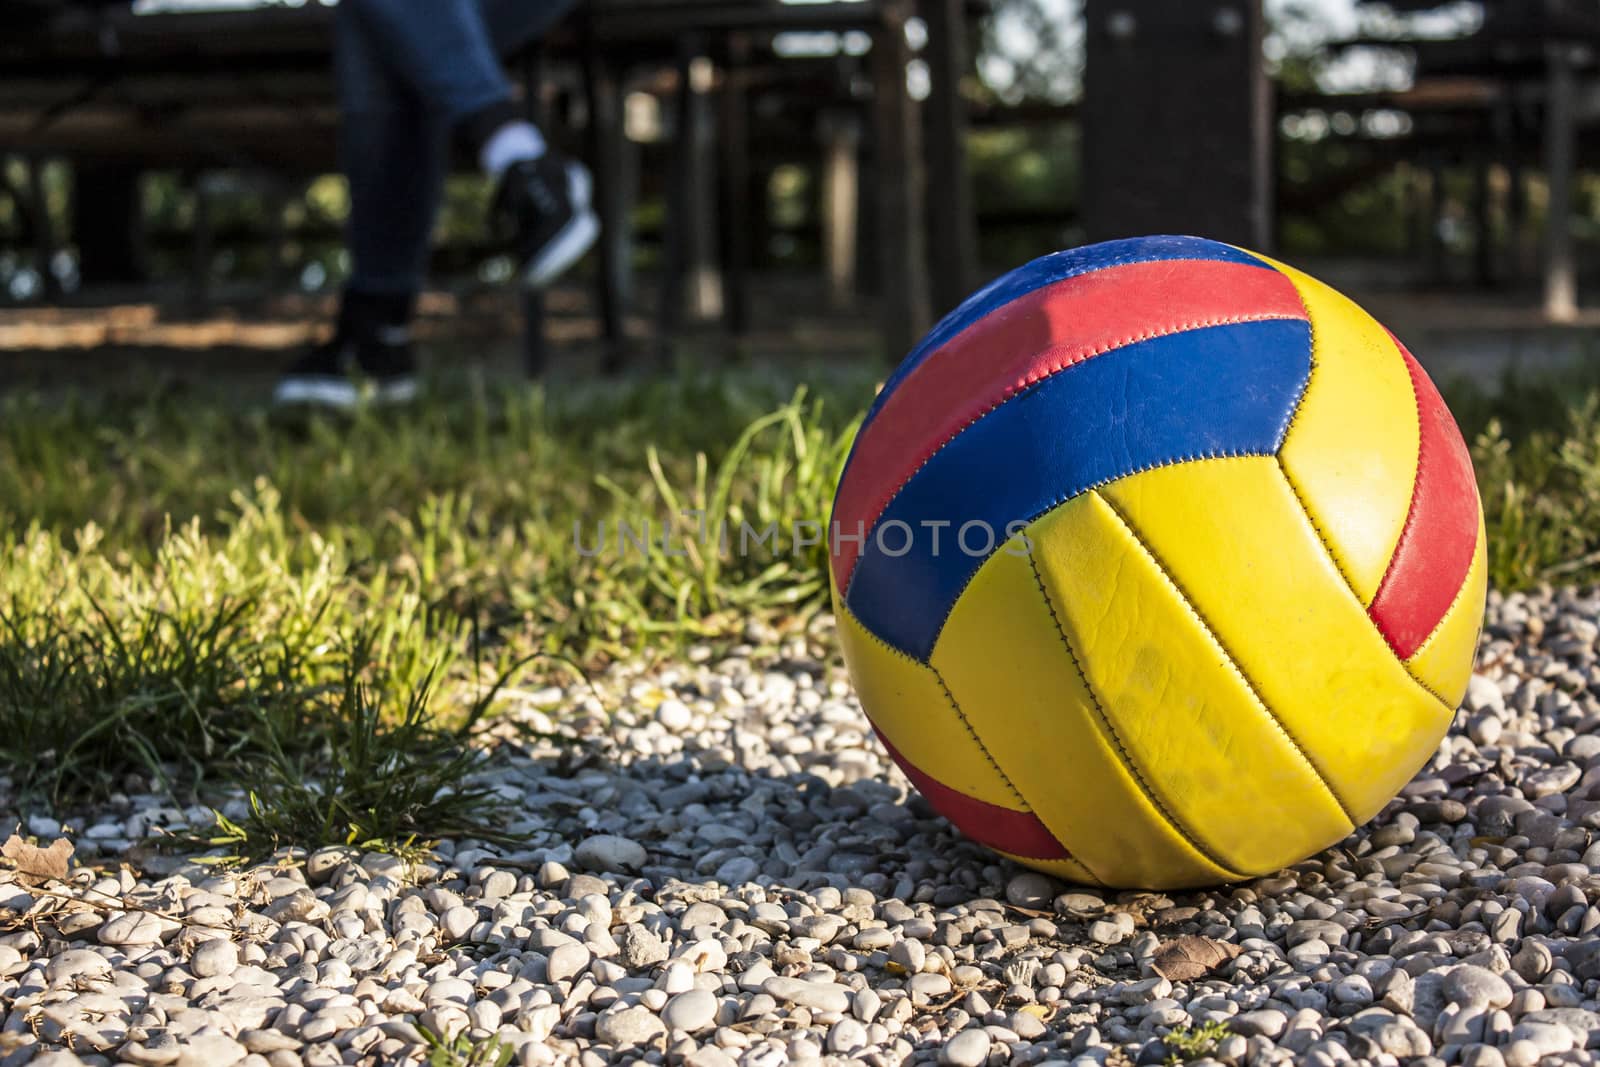 Volleyball and legs of a paused player. The fun of sports and outdoor play.